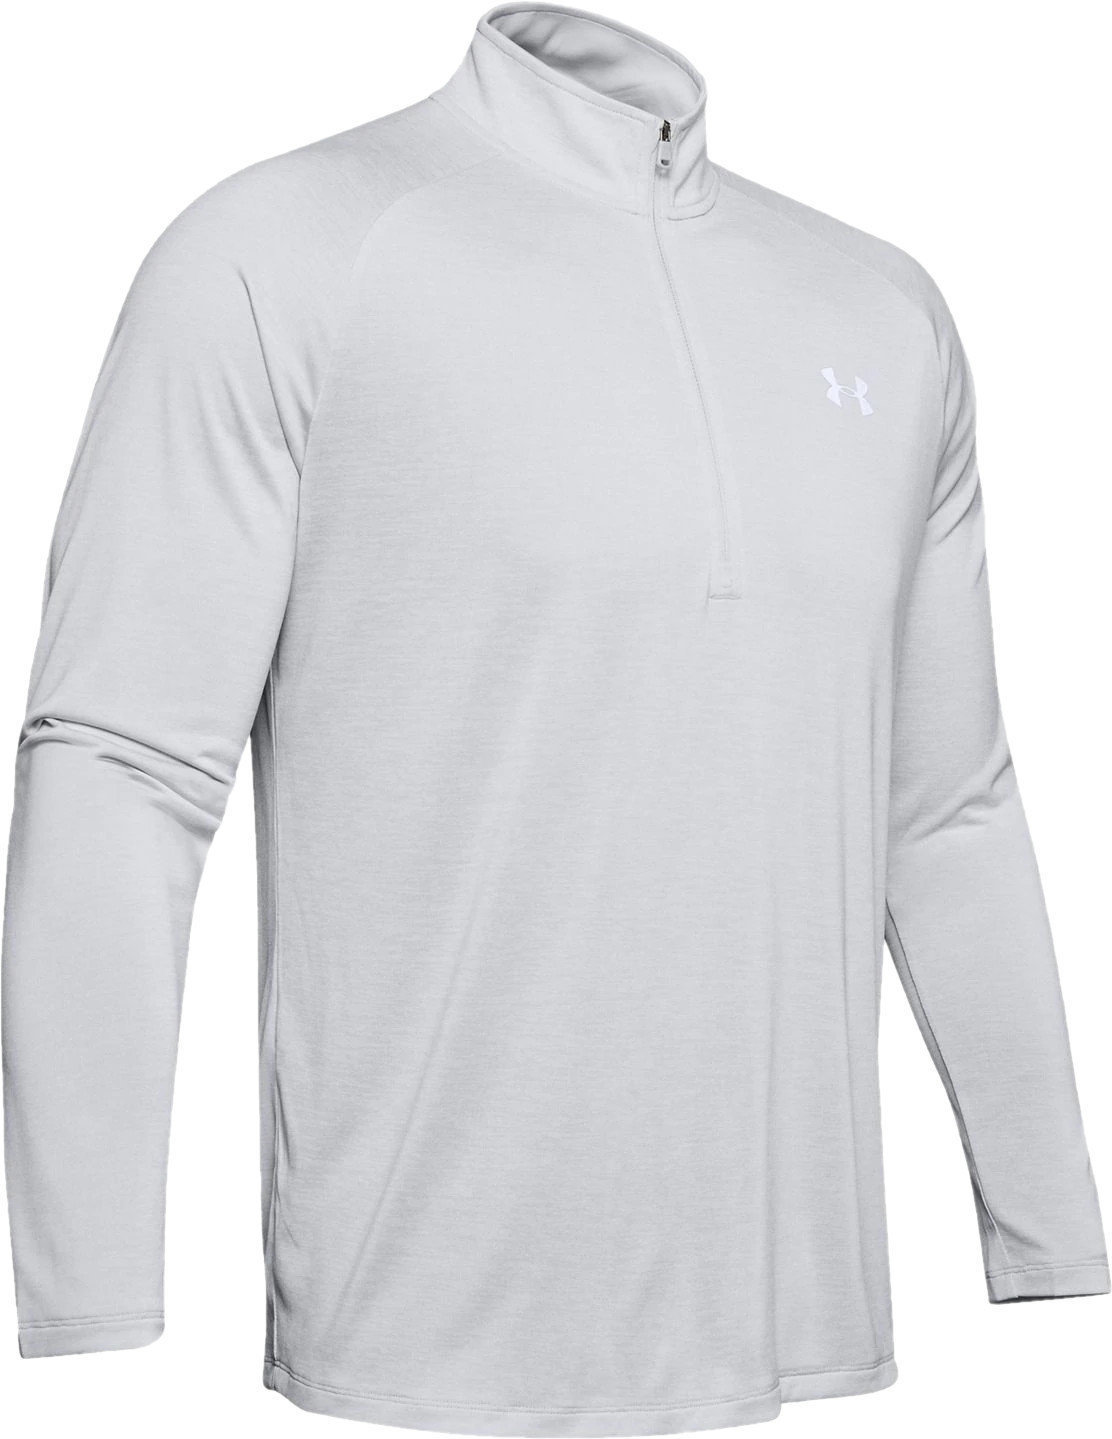 Pulover s kapuco/Pulover Under Armour Men's UA Tech 2.0 1/2 Zip Long Sleeve Halo Gray 2XL